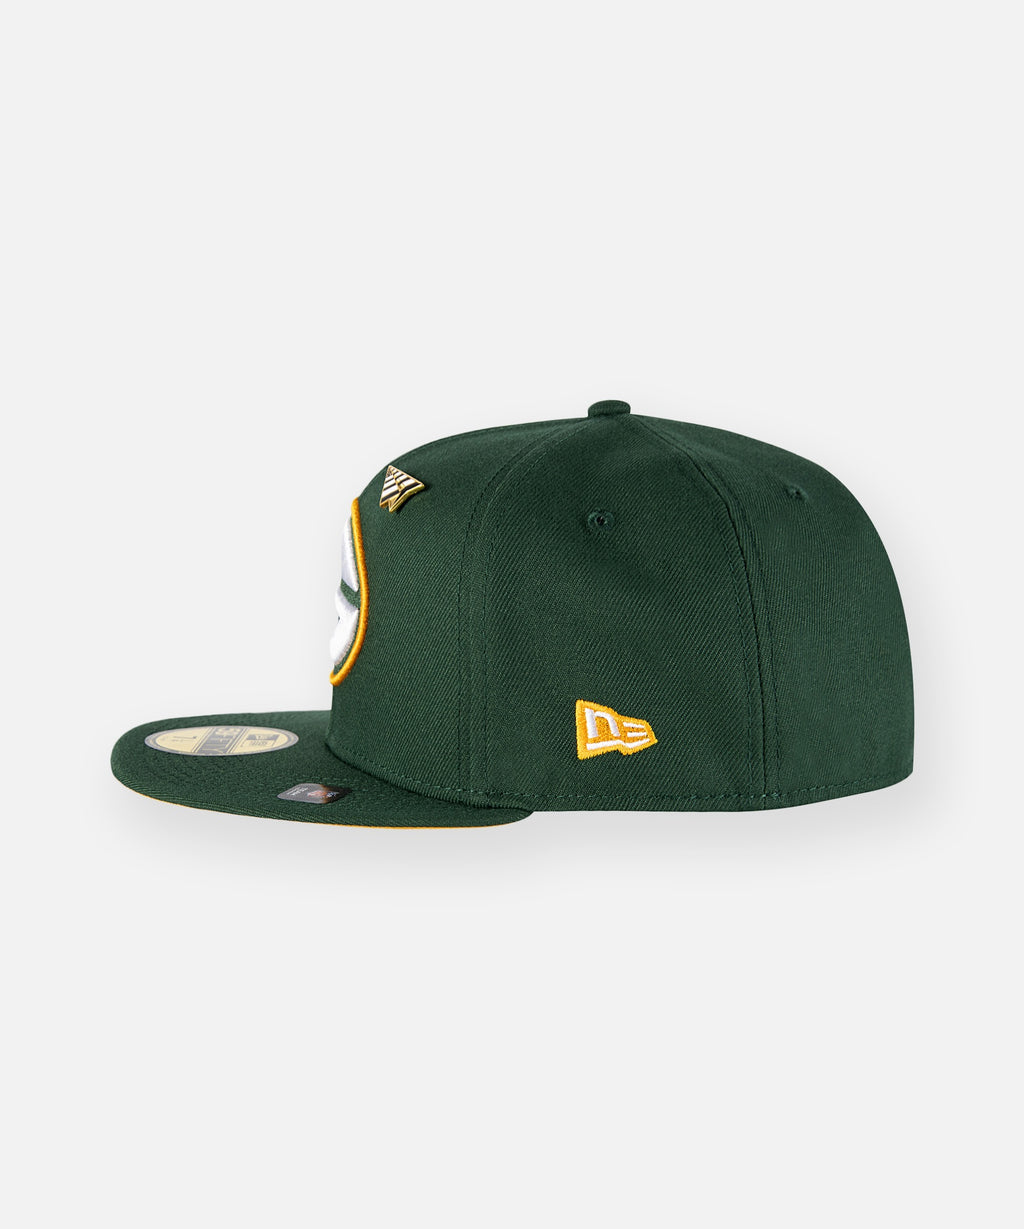 Paper Planes x Green Bay Packers Team Color 59Fifty Fitted Hat_For Men_4